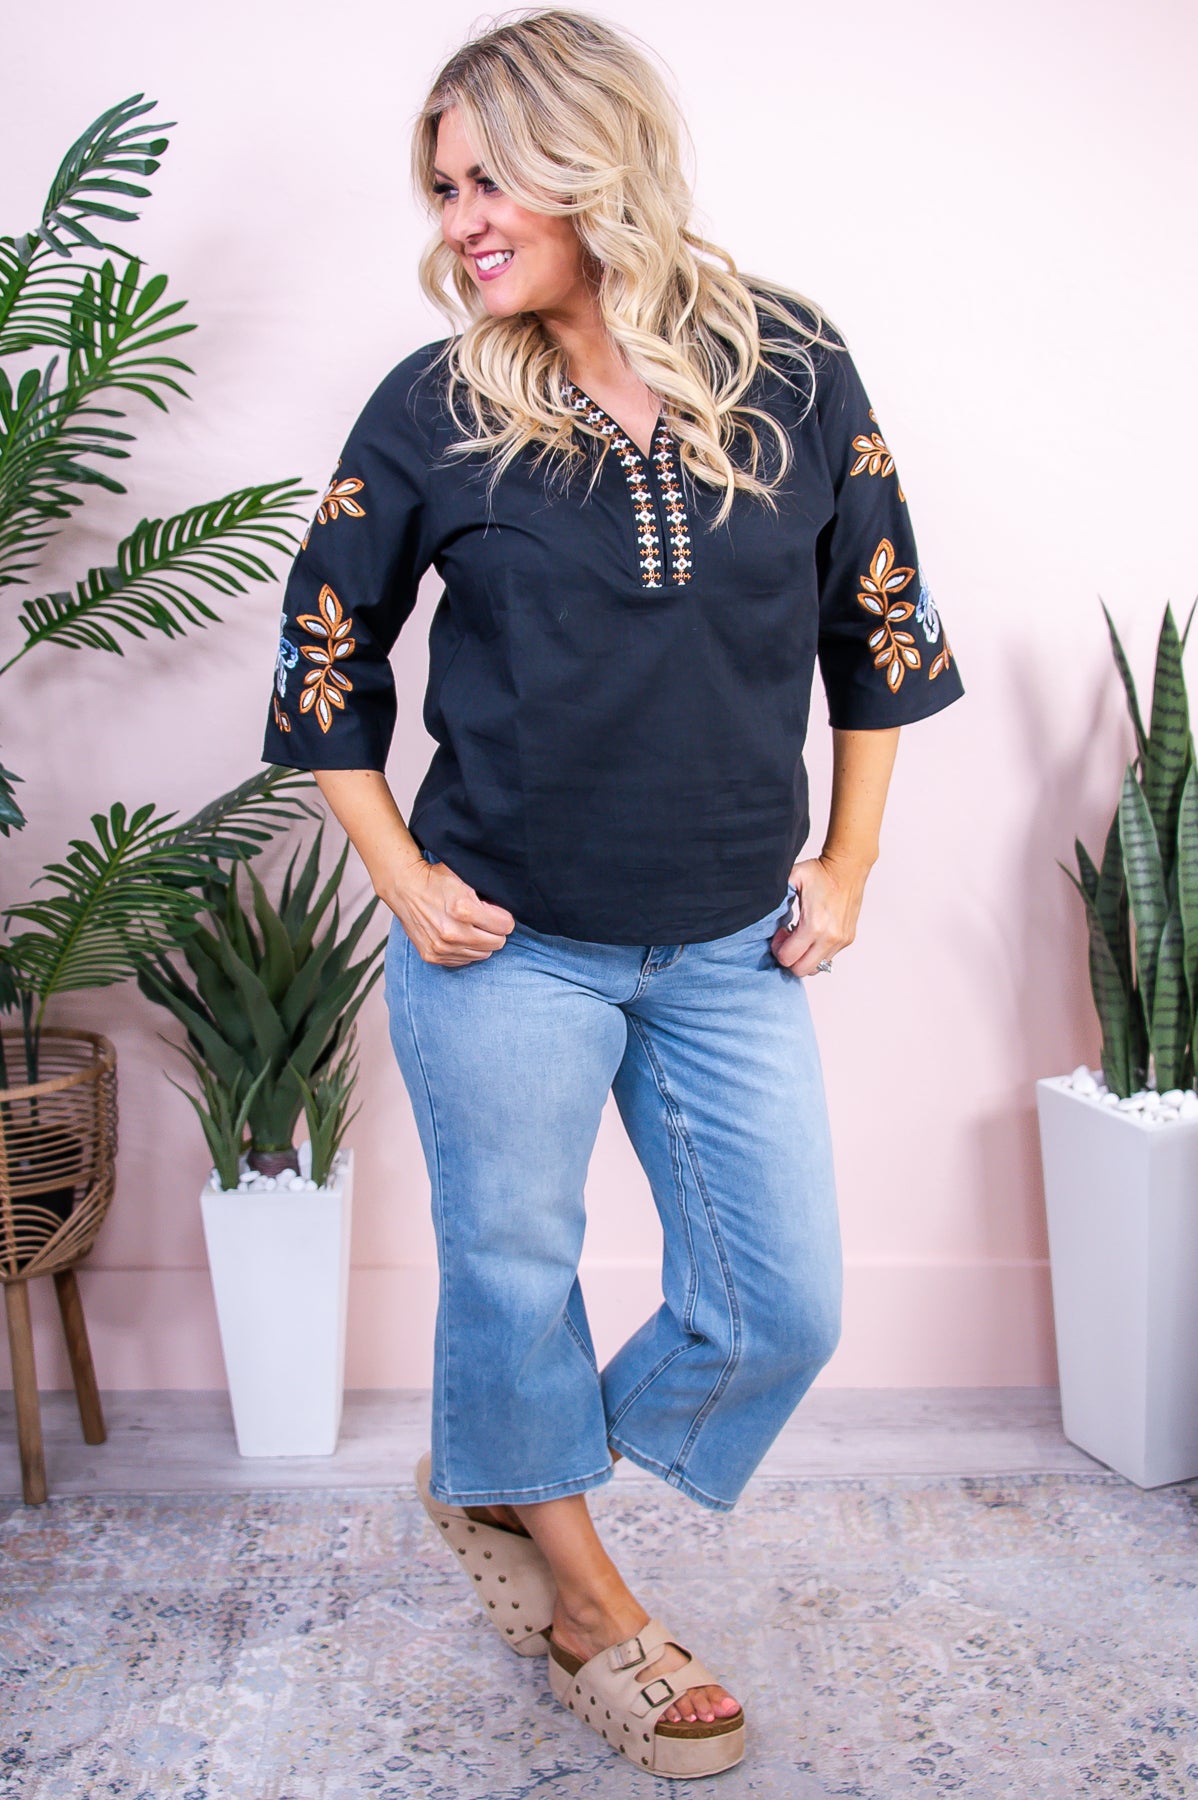 Best Day Yet Black/Brown Floral Embroidered Top - T9547BK